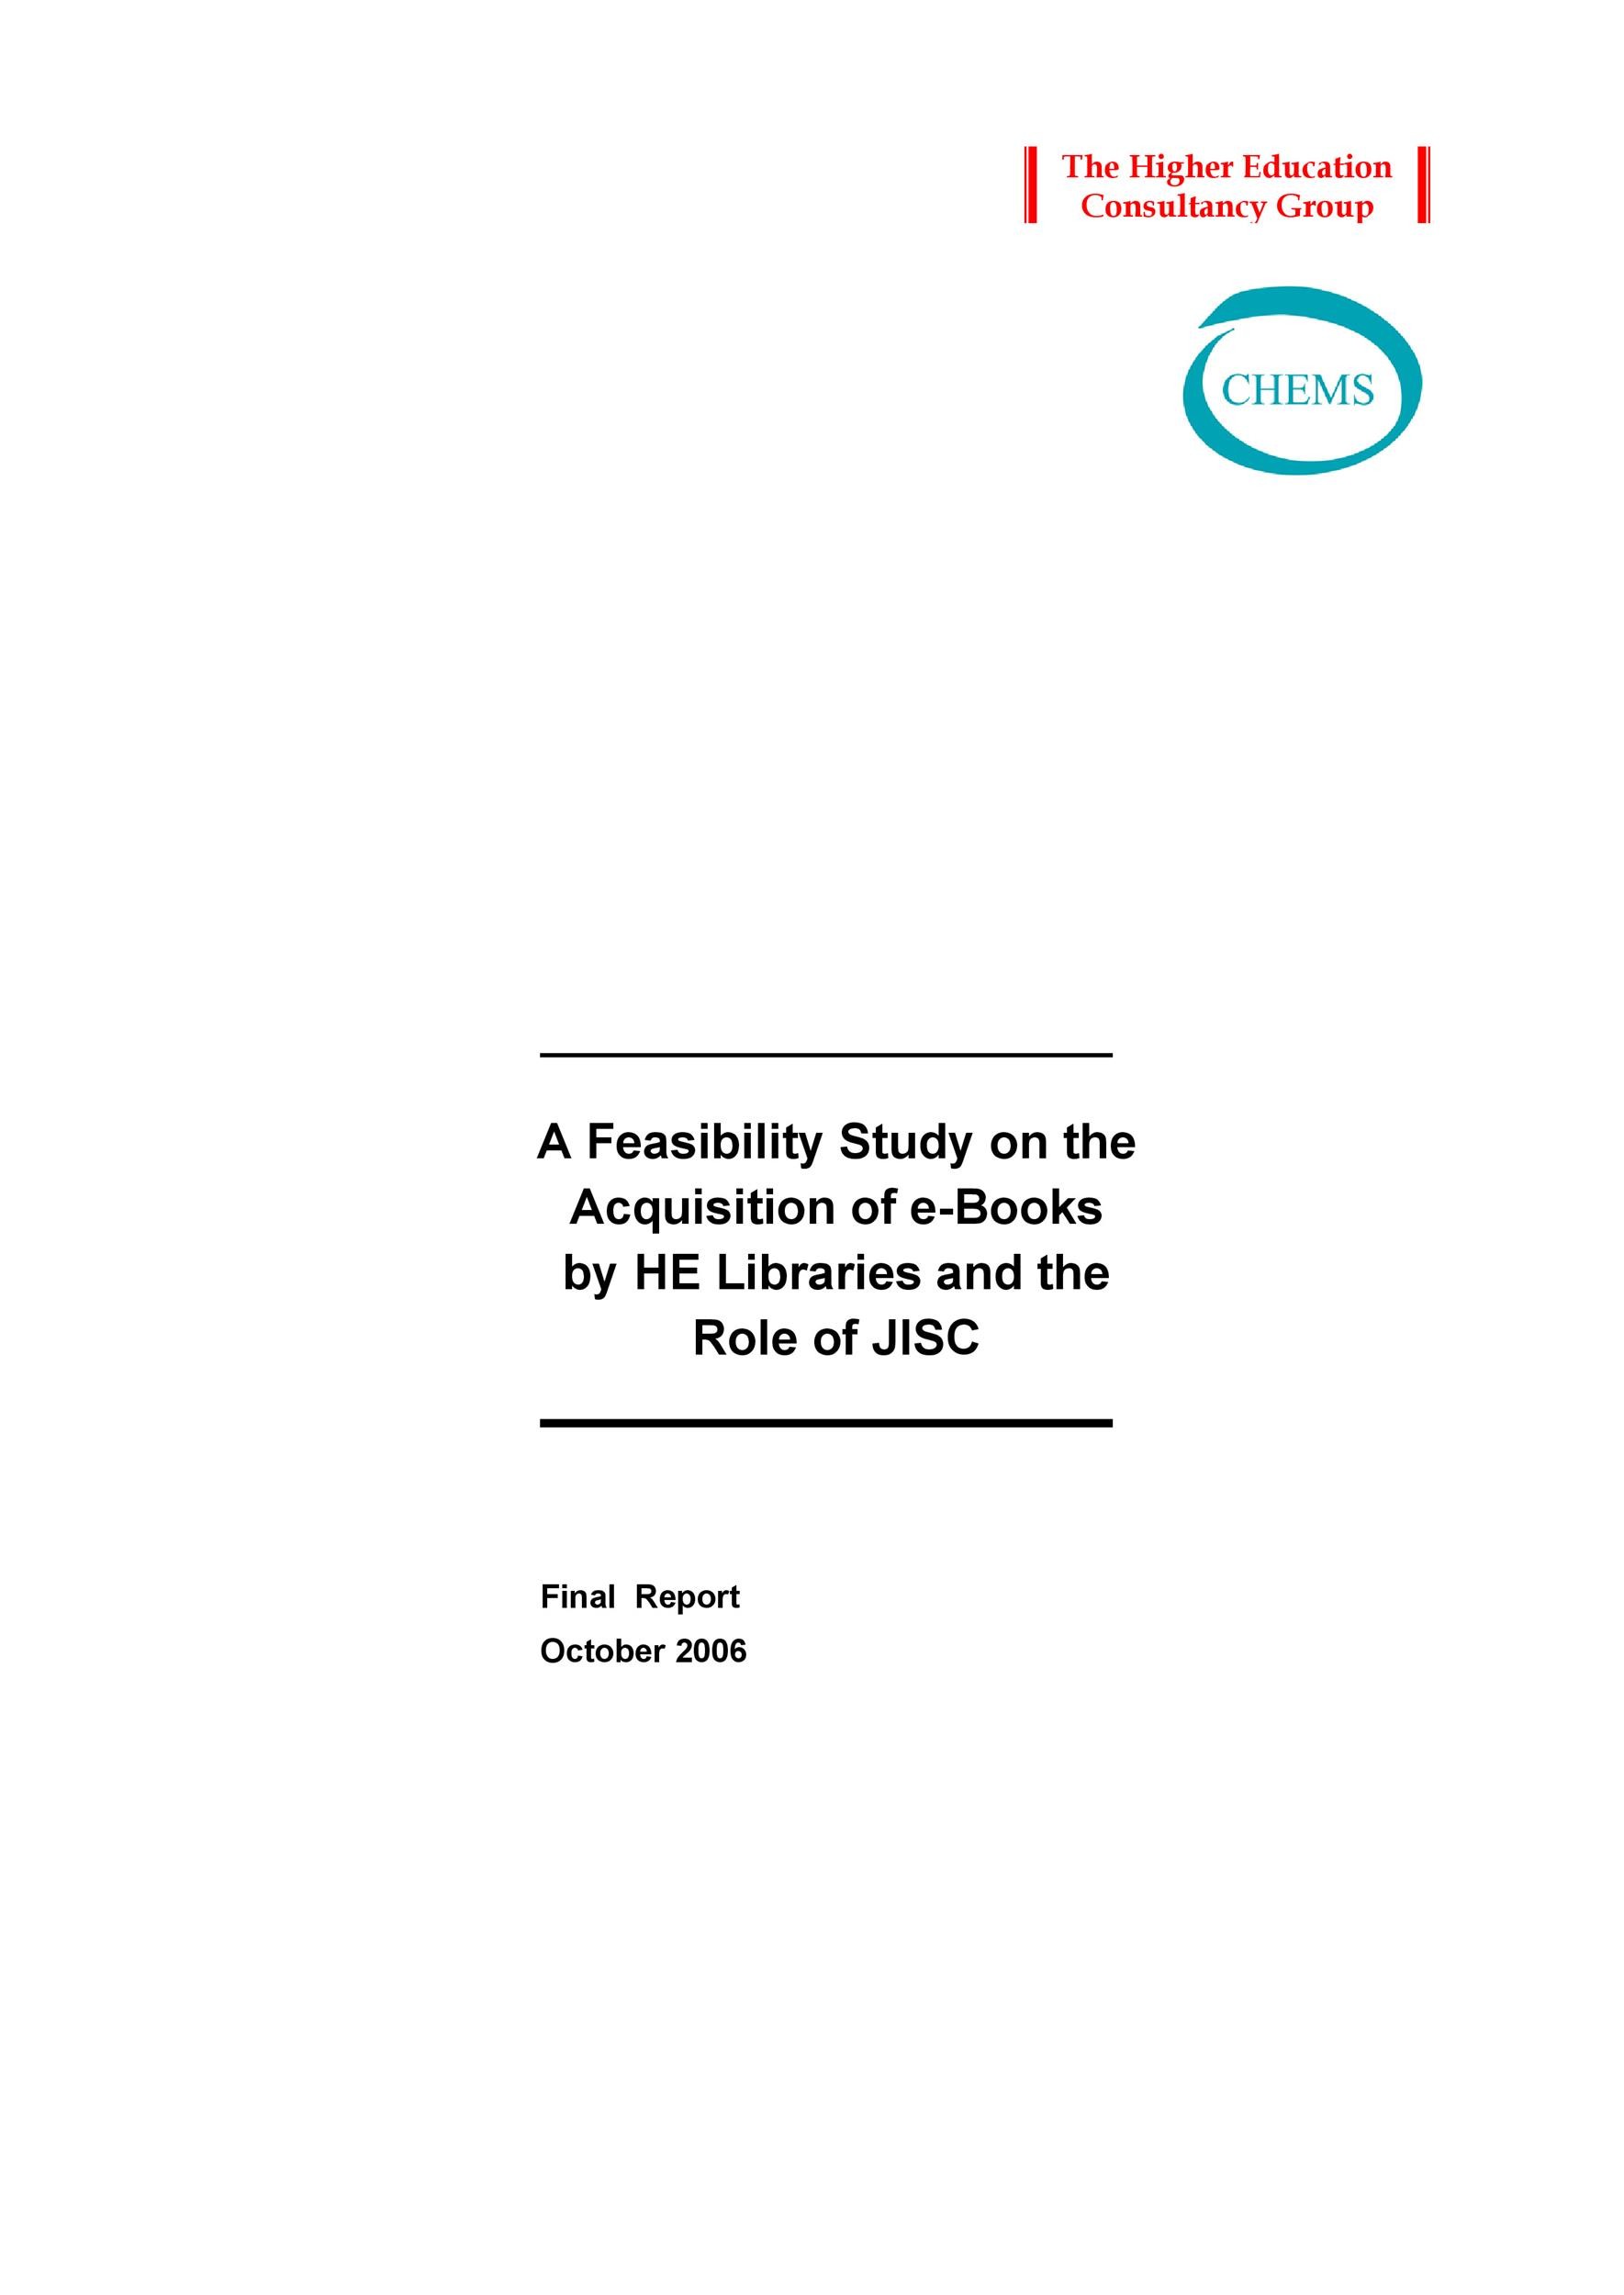 cover letter for feasibility study